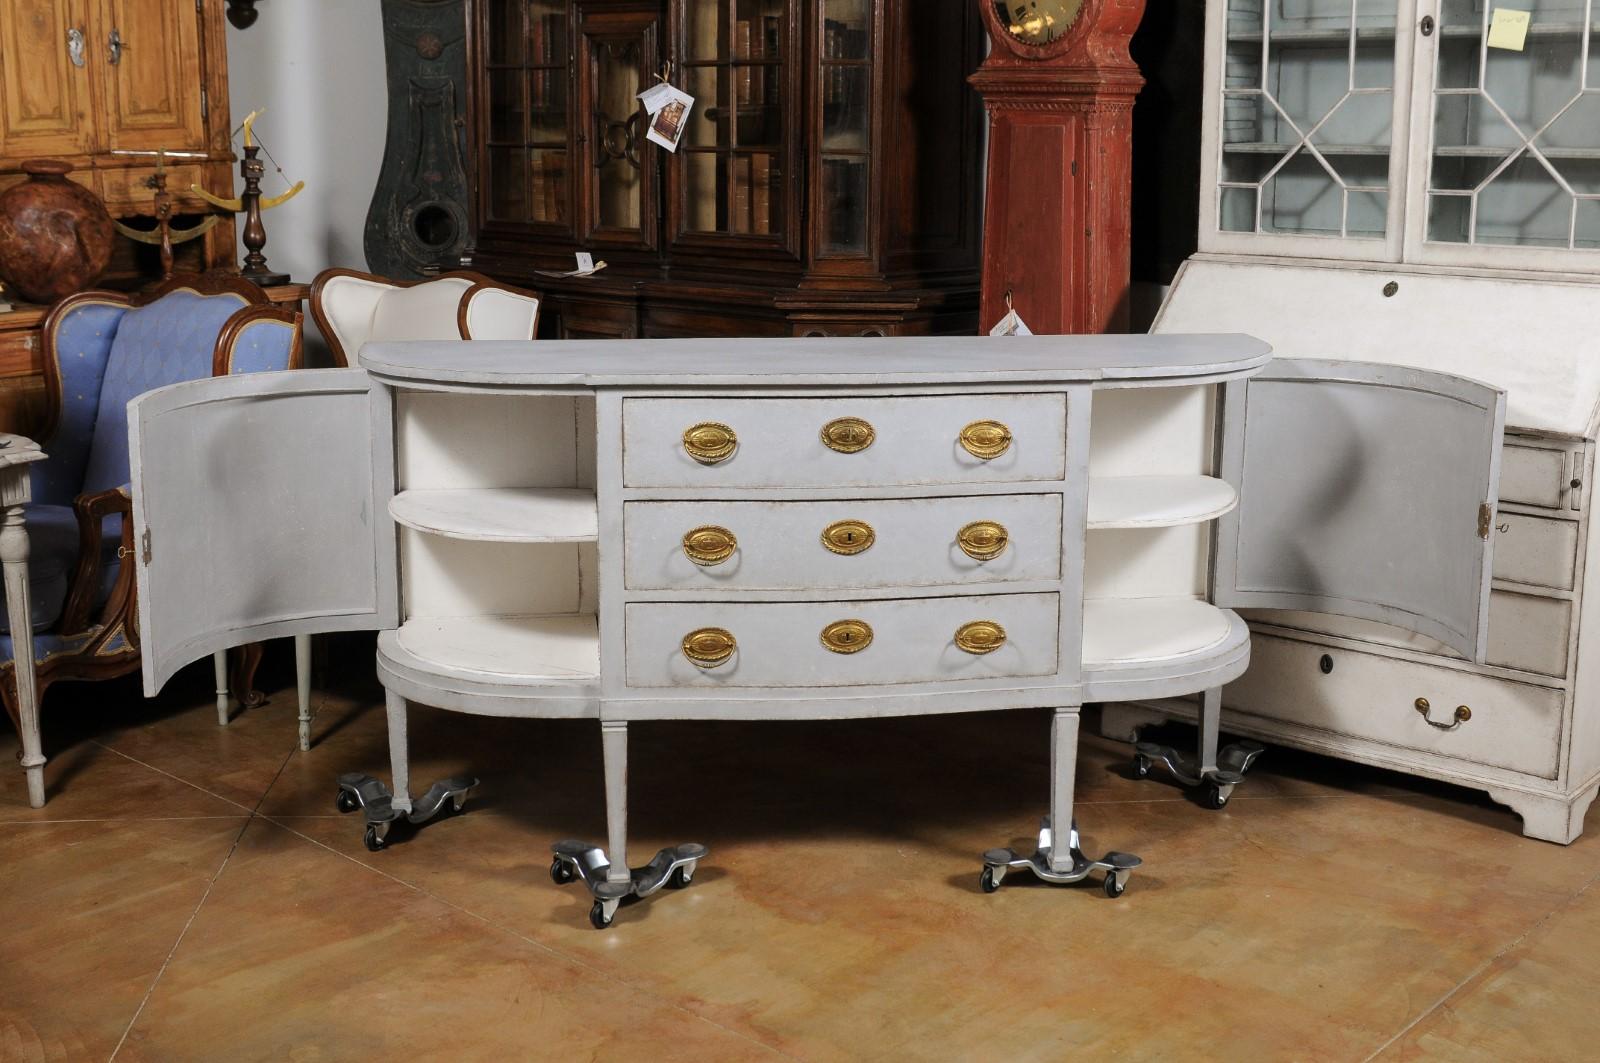 European 1830s Painted Demilune Sideboard with Three Drawers and Rounded Doors For Sale 7